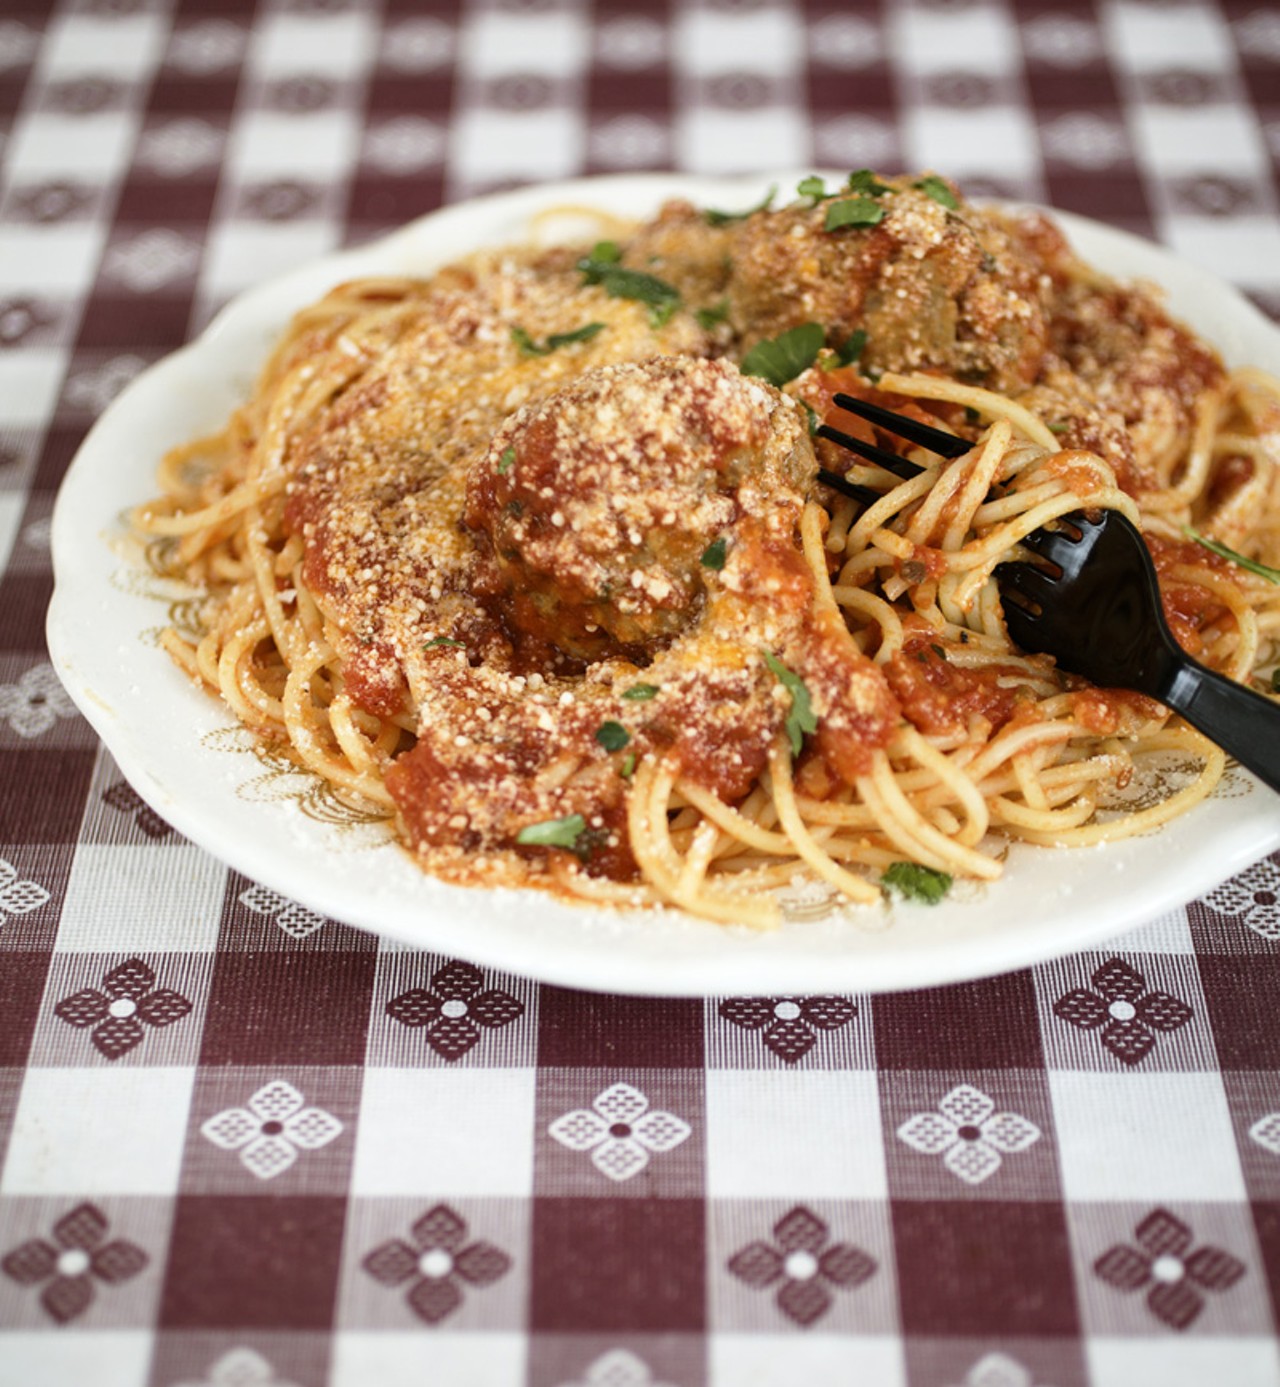 Spaghetti and meatballs, served with a marinara sauce. Both the marinara and meat sauces at Filomena's are prepared with imported San Marzano Tomatoes and extra virgin olive oil.